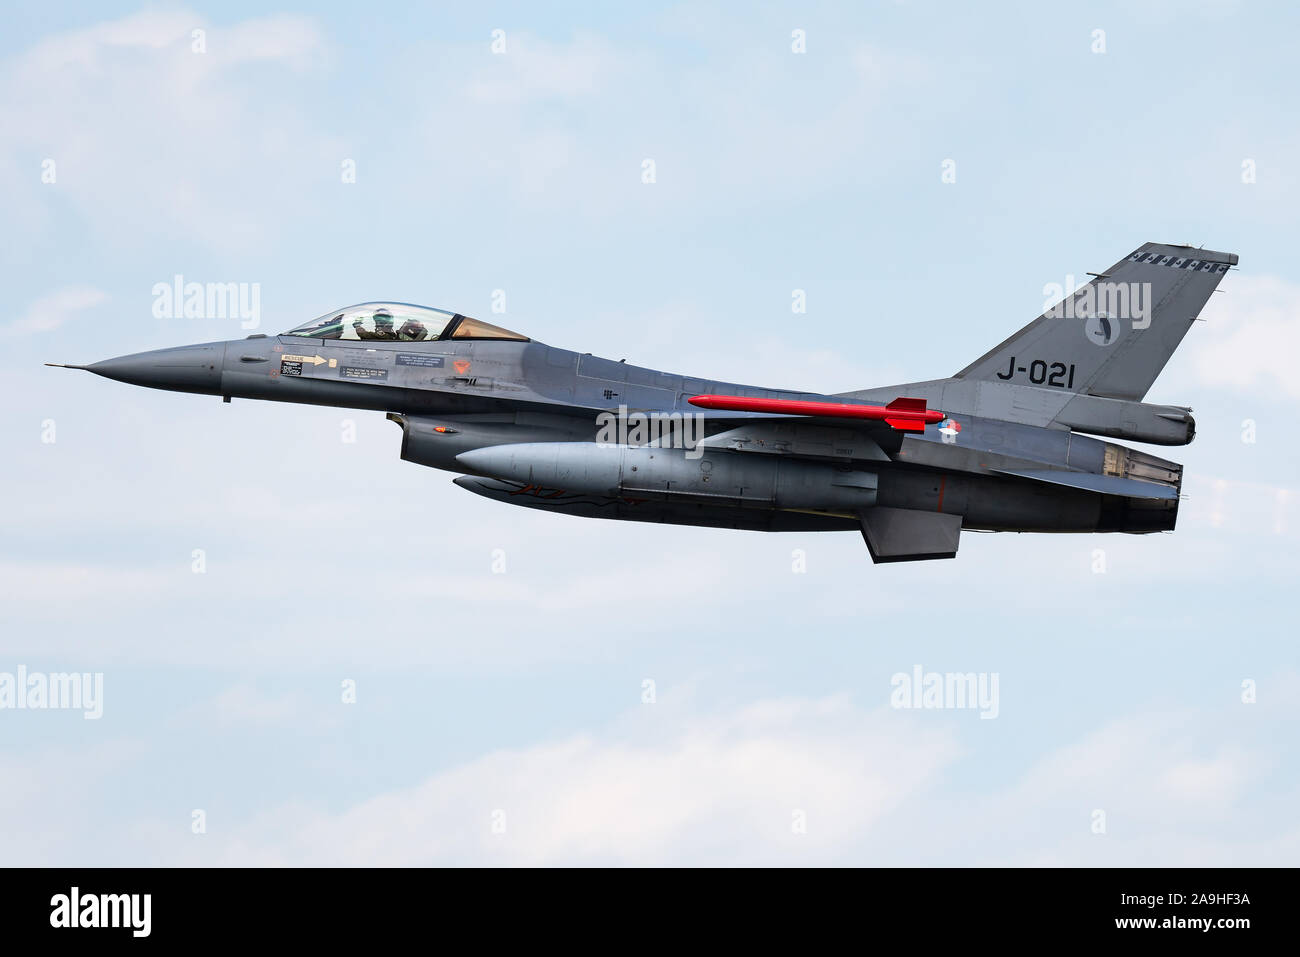 A General Dynamics F-16 Fighting Falcon single-engine supersonic multirole fighter aircraft of the Royal Netherlands Air Force at the Volkel airbase. Stock Photo